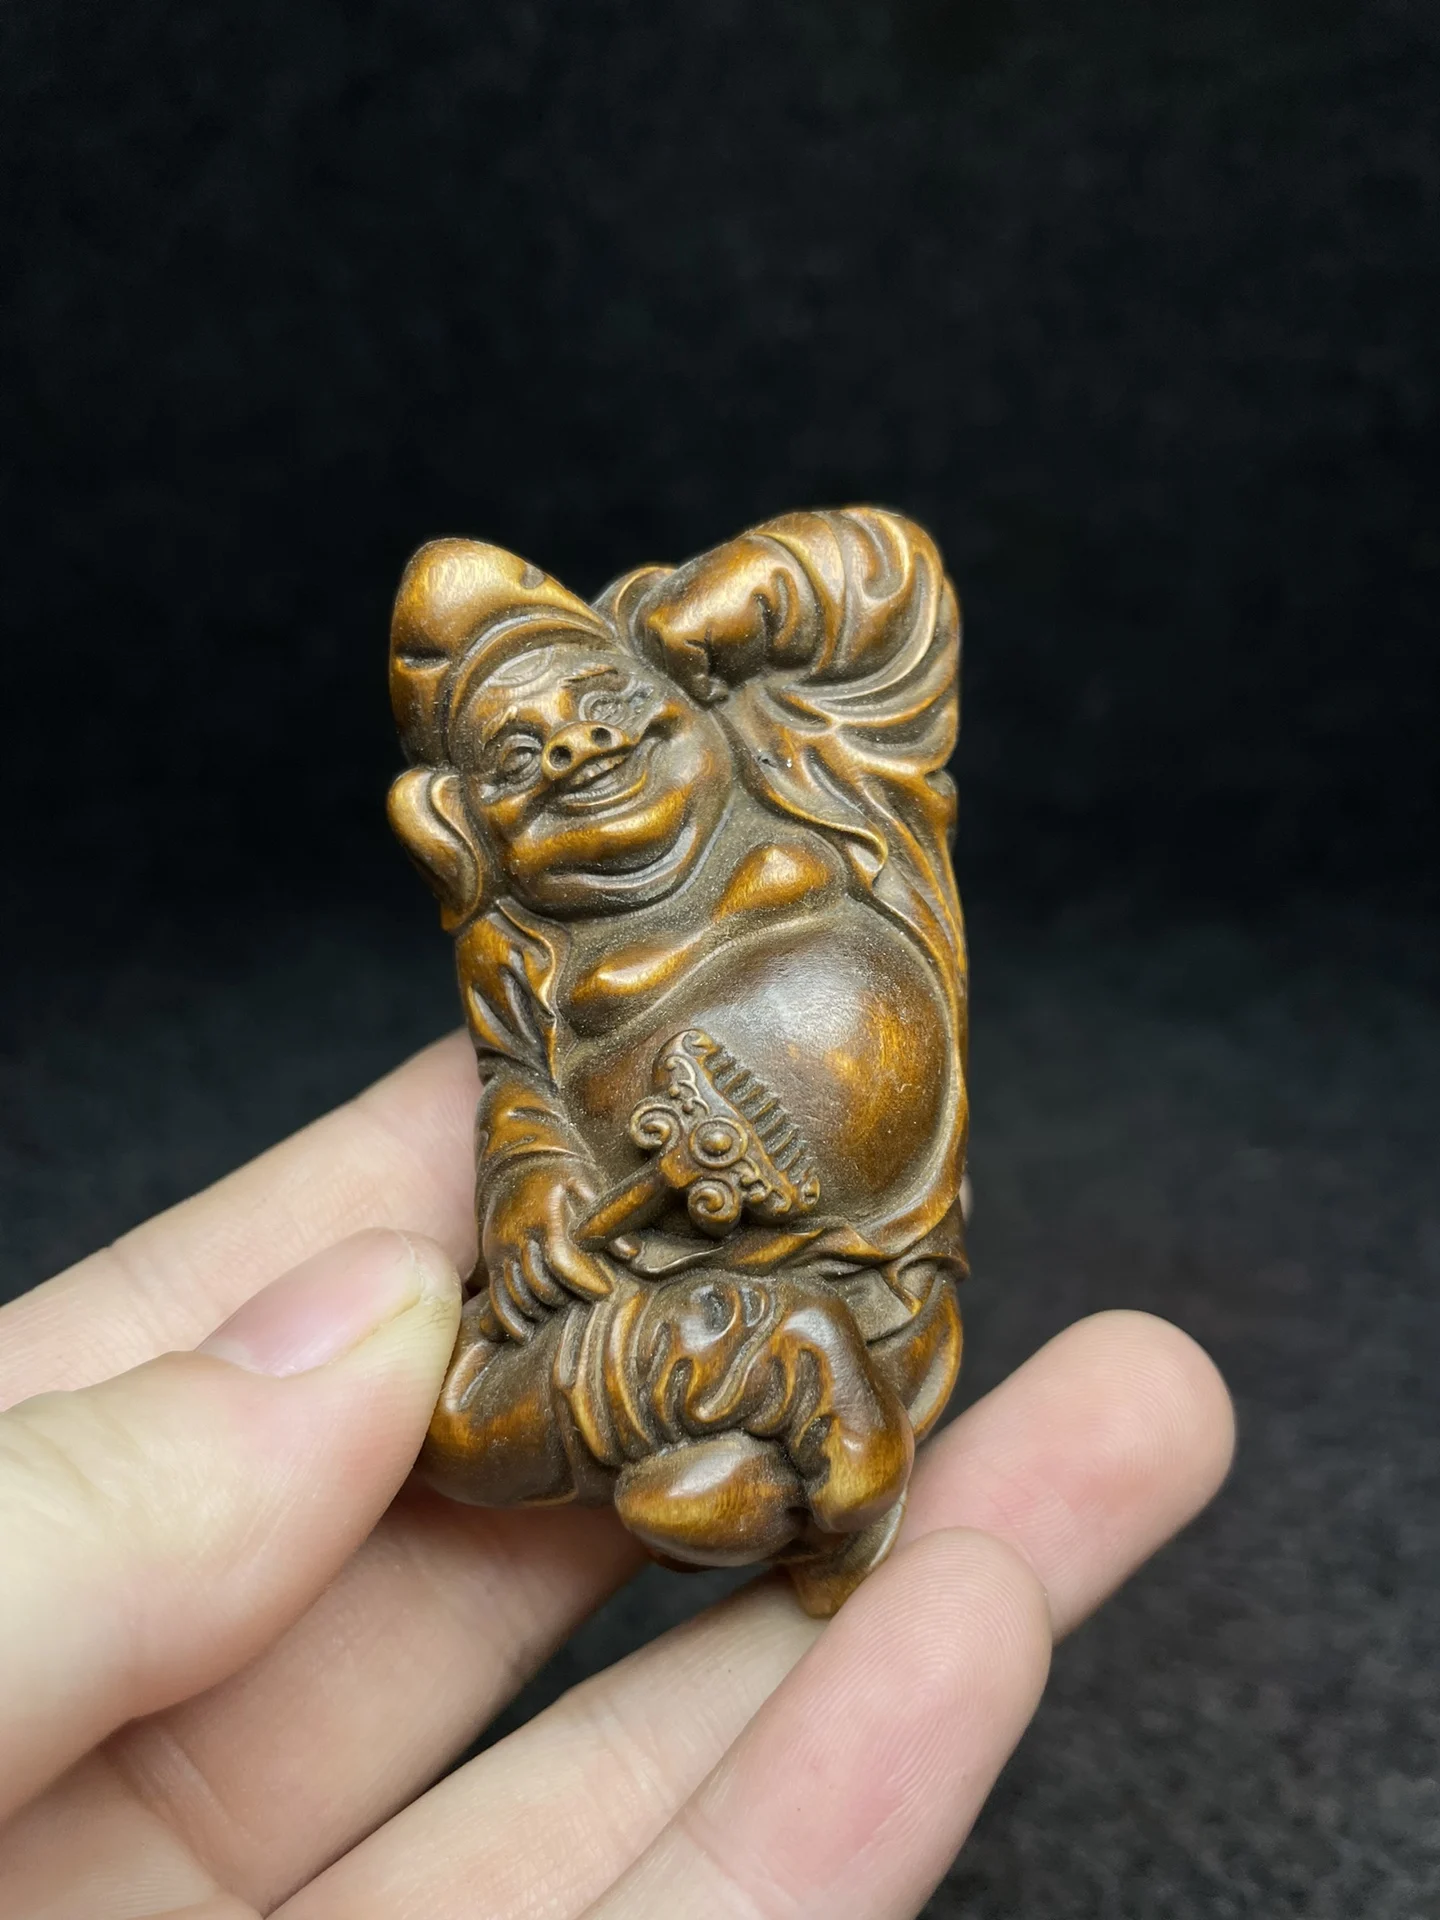 

Huangyang Wood Carved Plastic Ornaments Suitable for Decorative Collection Have a Beautiful Appearance